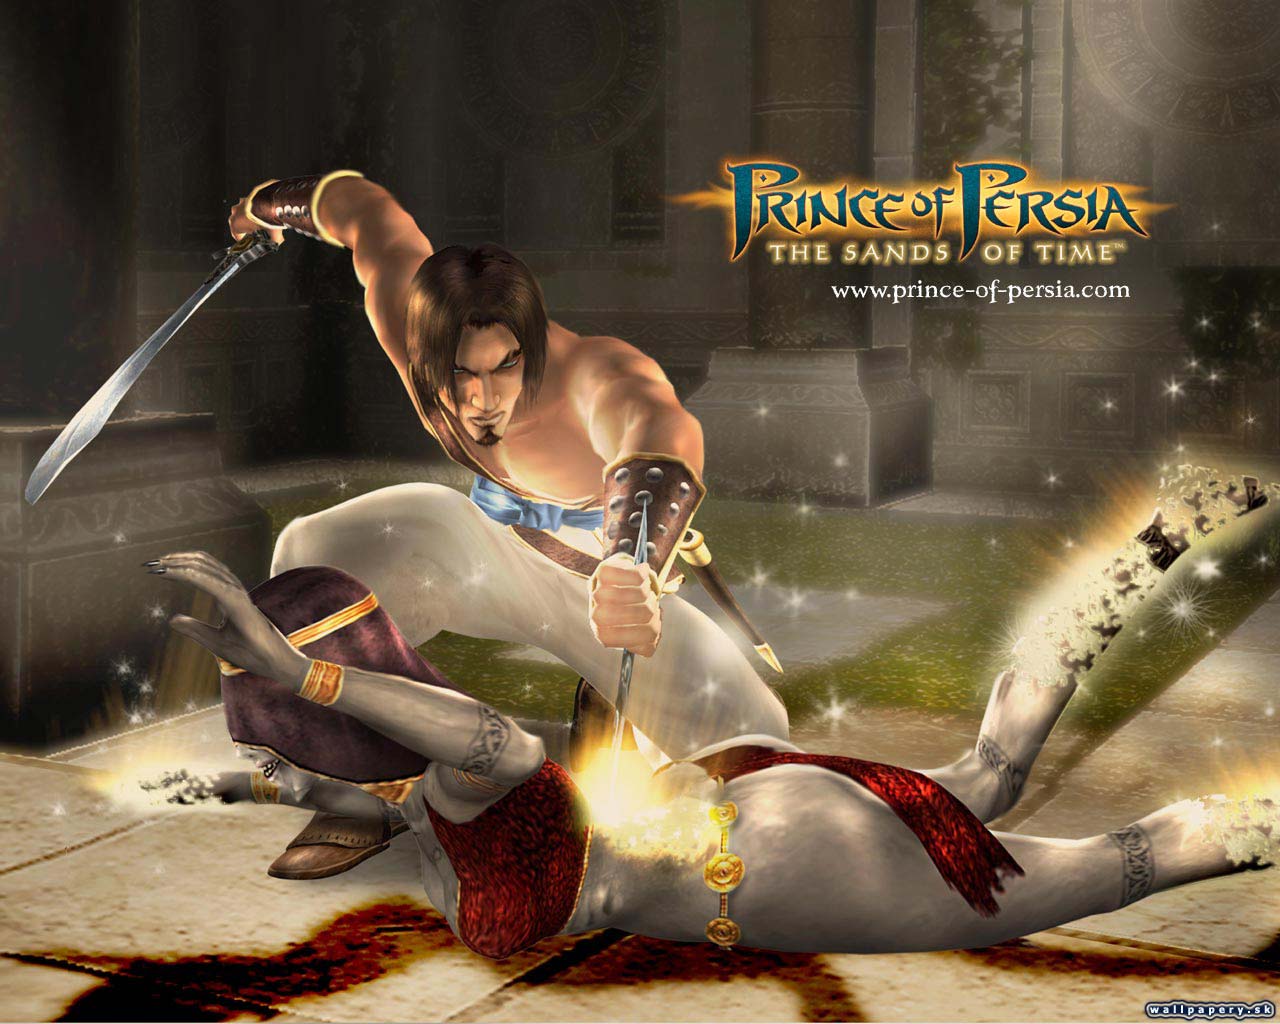 Prince of Persia: The Sands of Time - wallpaper 10